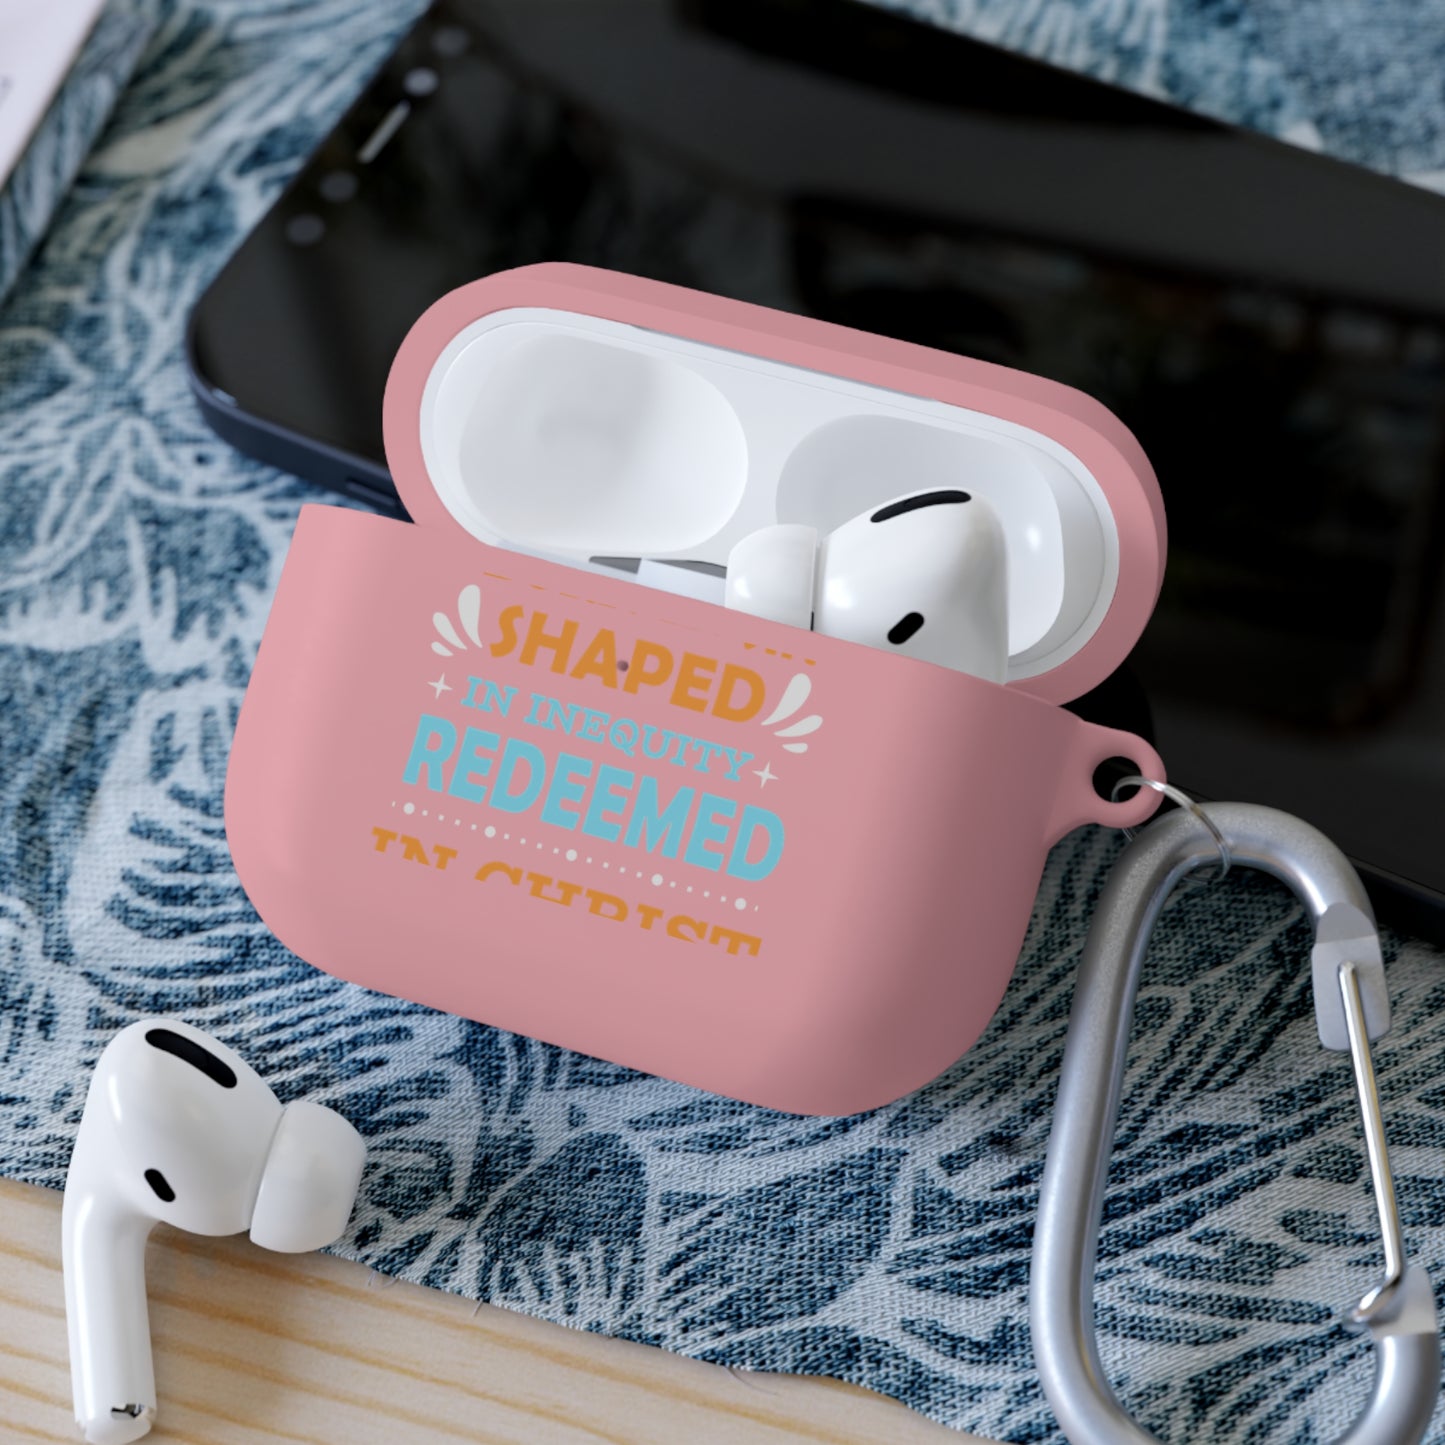 Born In Sin Shaped In Inequity Redeemed In Christ Airpod / Airpods Pro Case cover